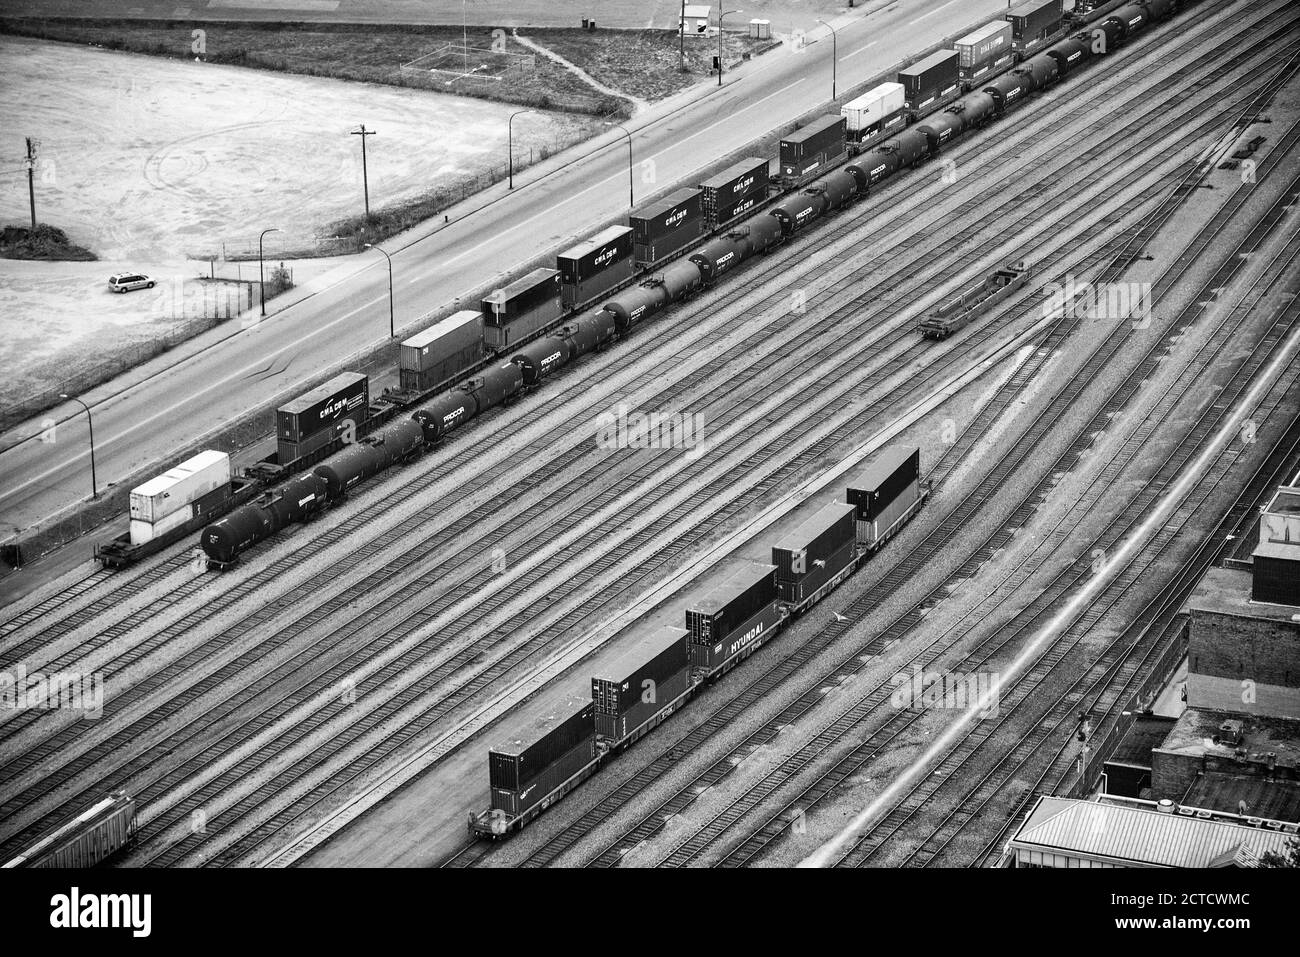 VANCOUVER - AUGUST 10, 2017: Aerial view of train station with cargo. Stock Photo